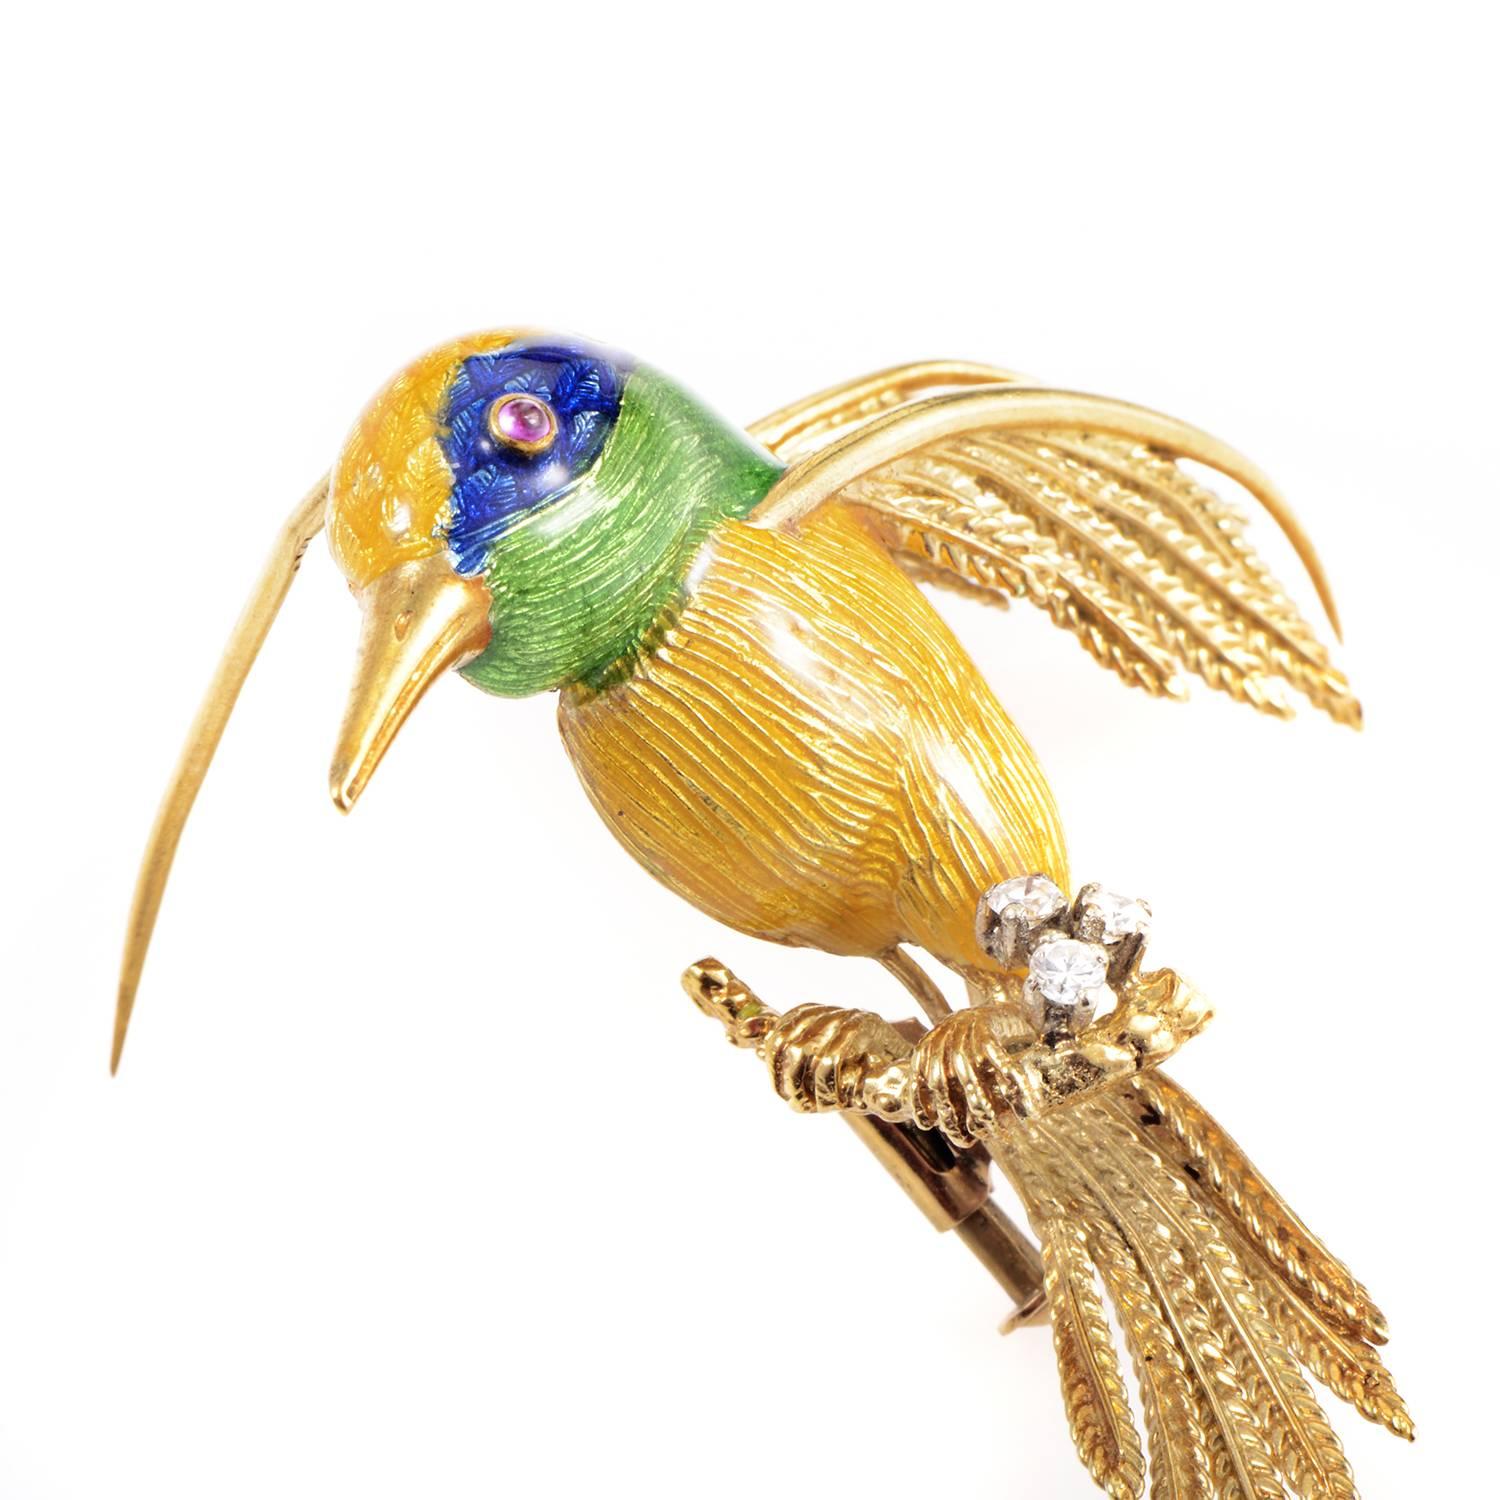 Tropical colors and precious stones accentuate the glorious flutter of 18K Yellow Gold in the design of this brooch. The 18K Yellow wings unfold with delicate detail. The precious metal extends throughout the rest of this petite body under a